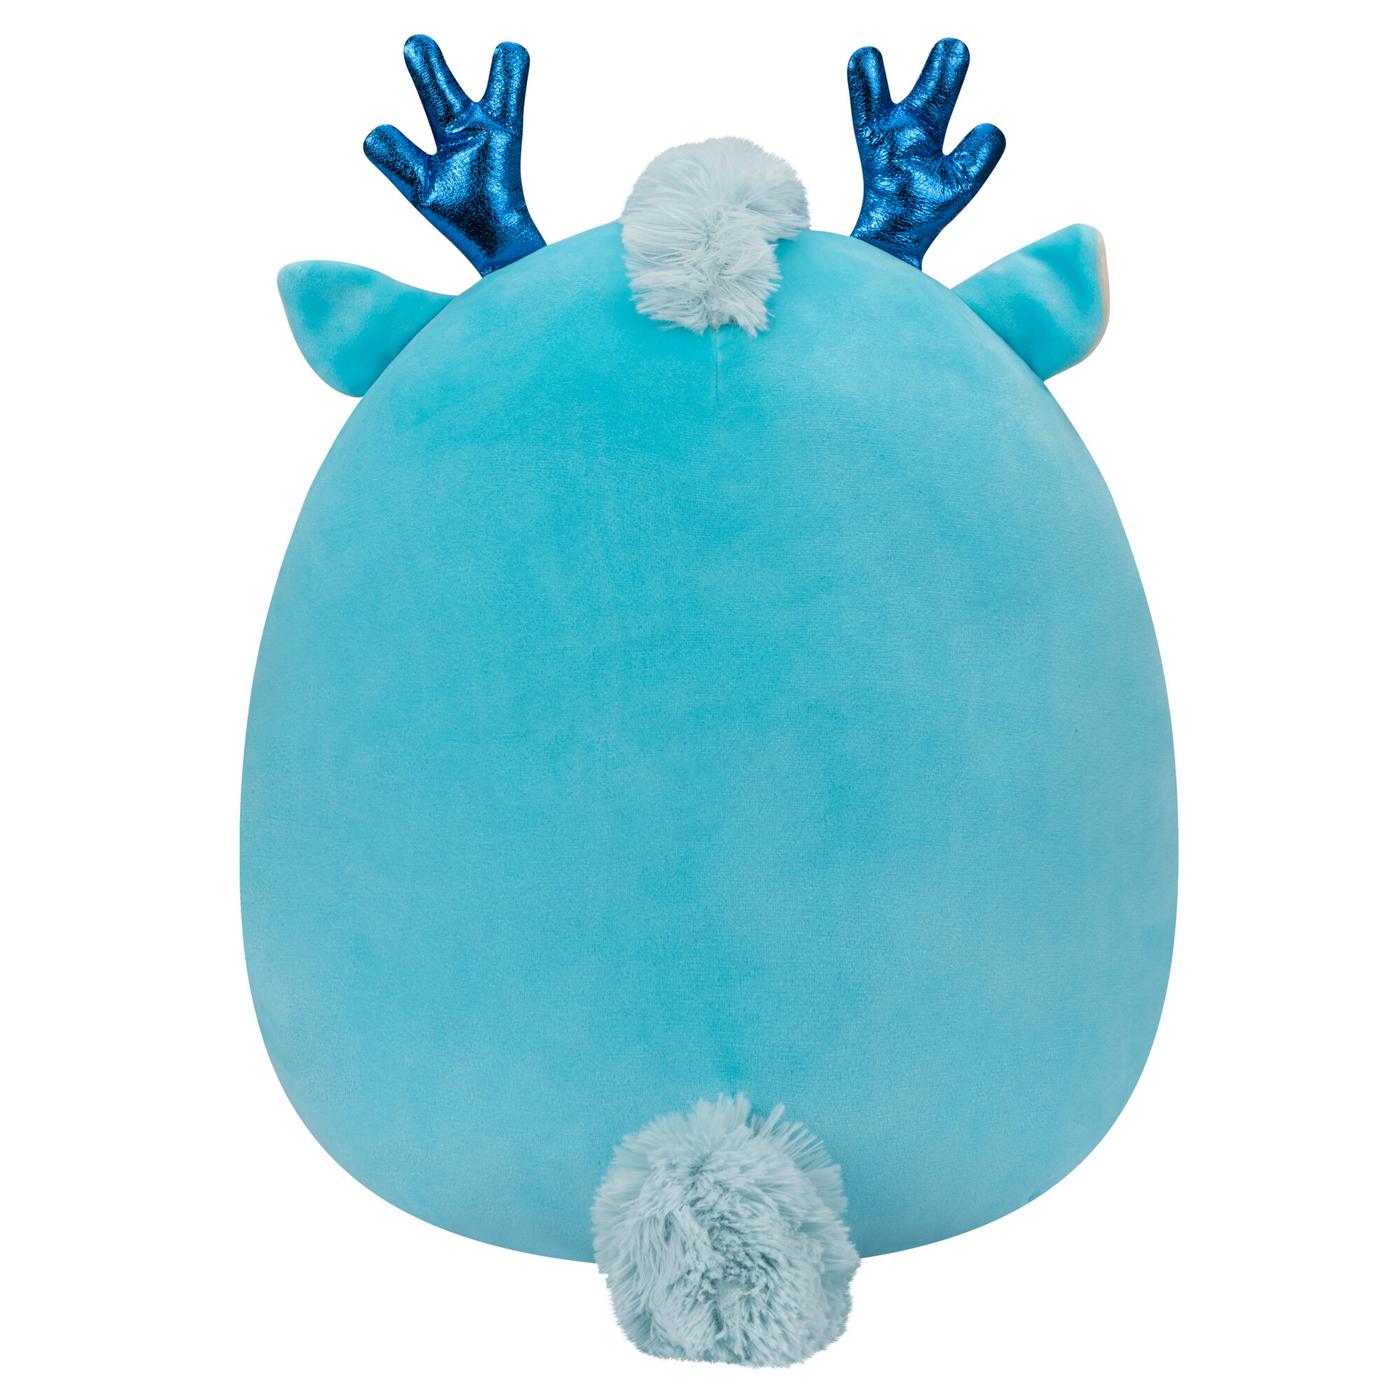 Squishmallows Reindeer Plush - Blue; image 3 of 3